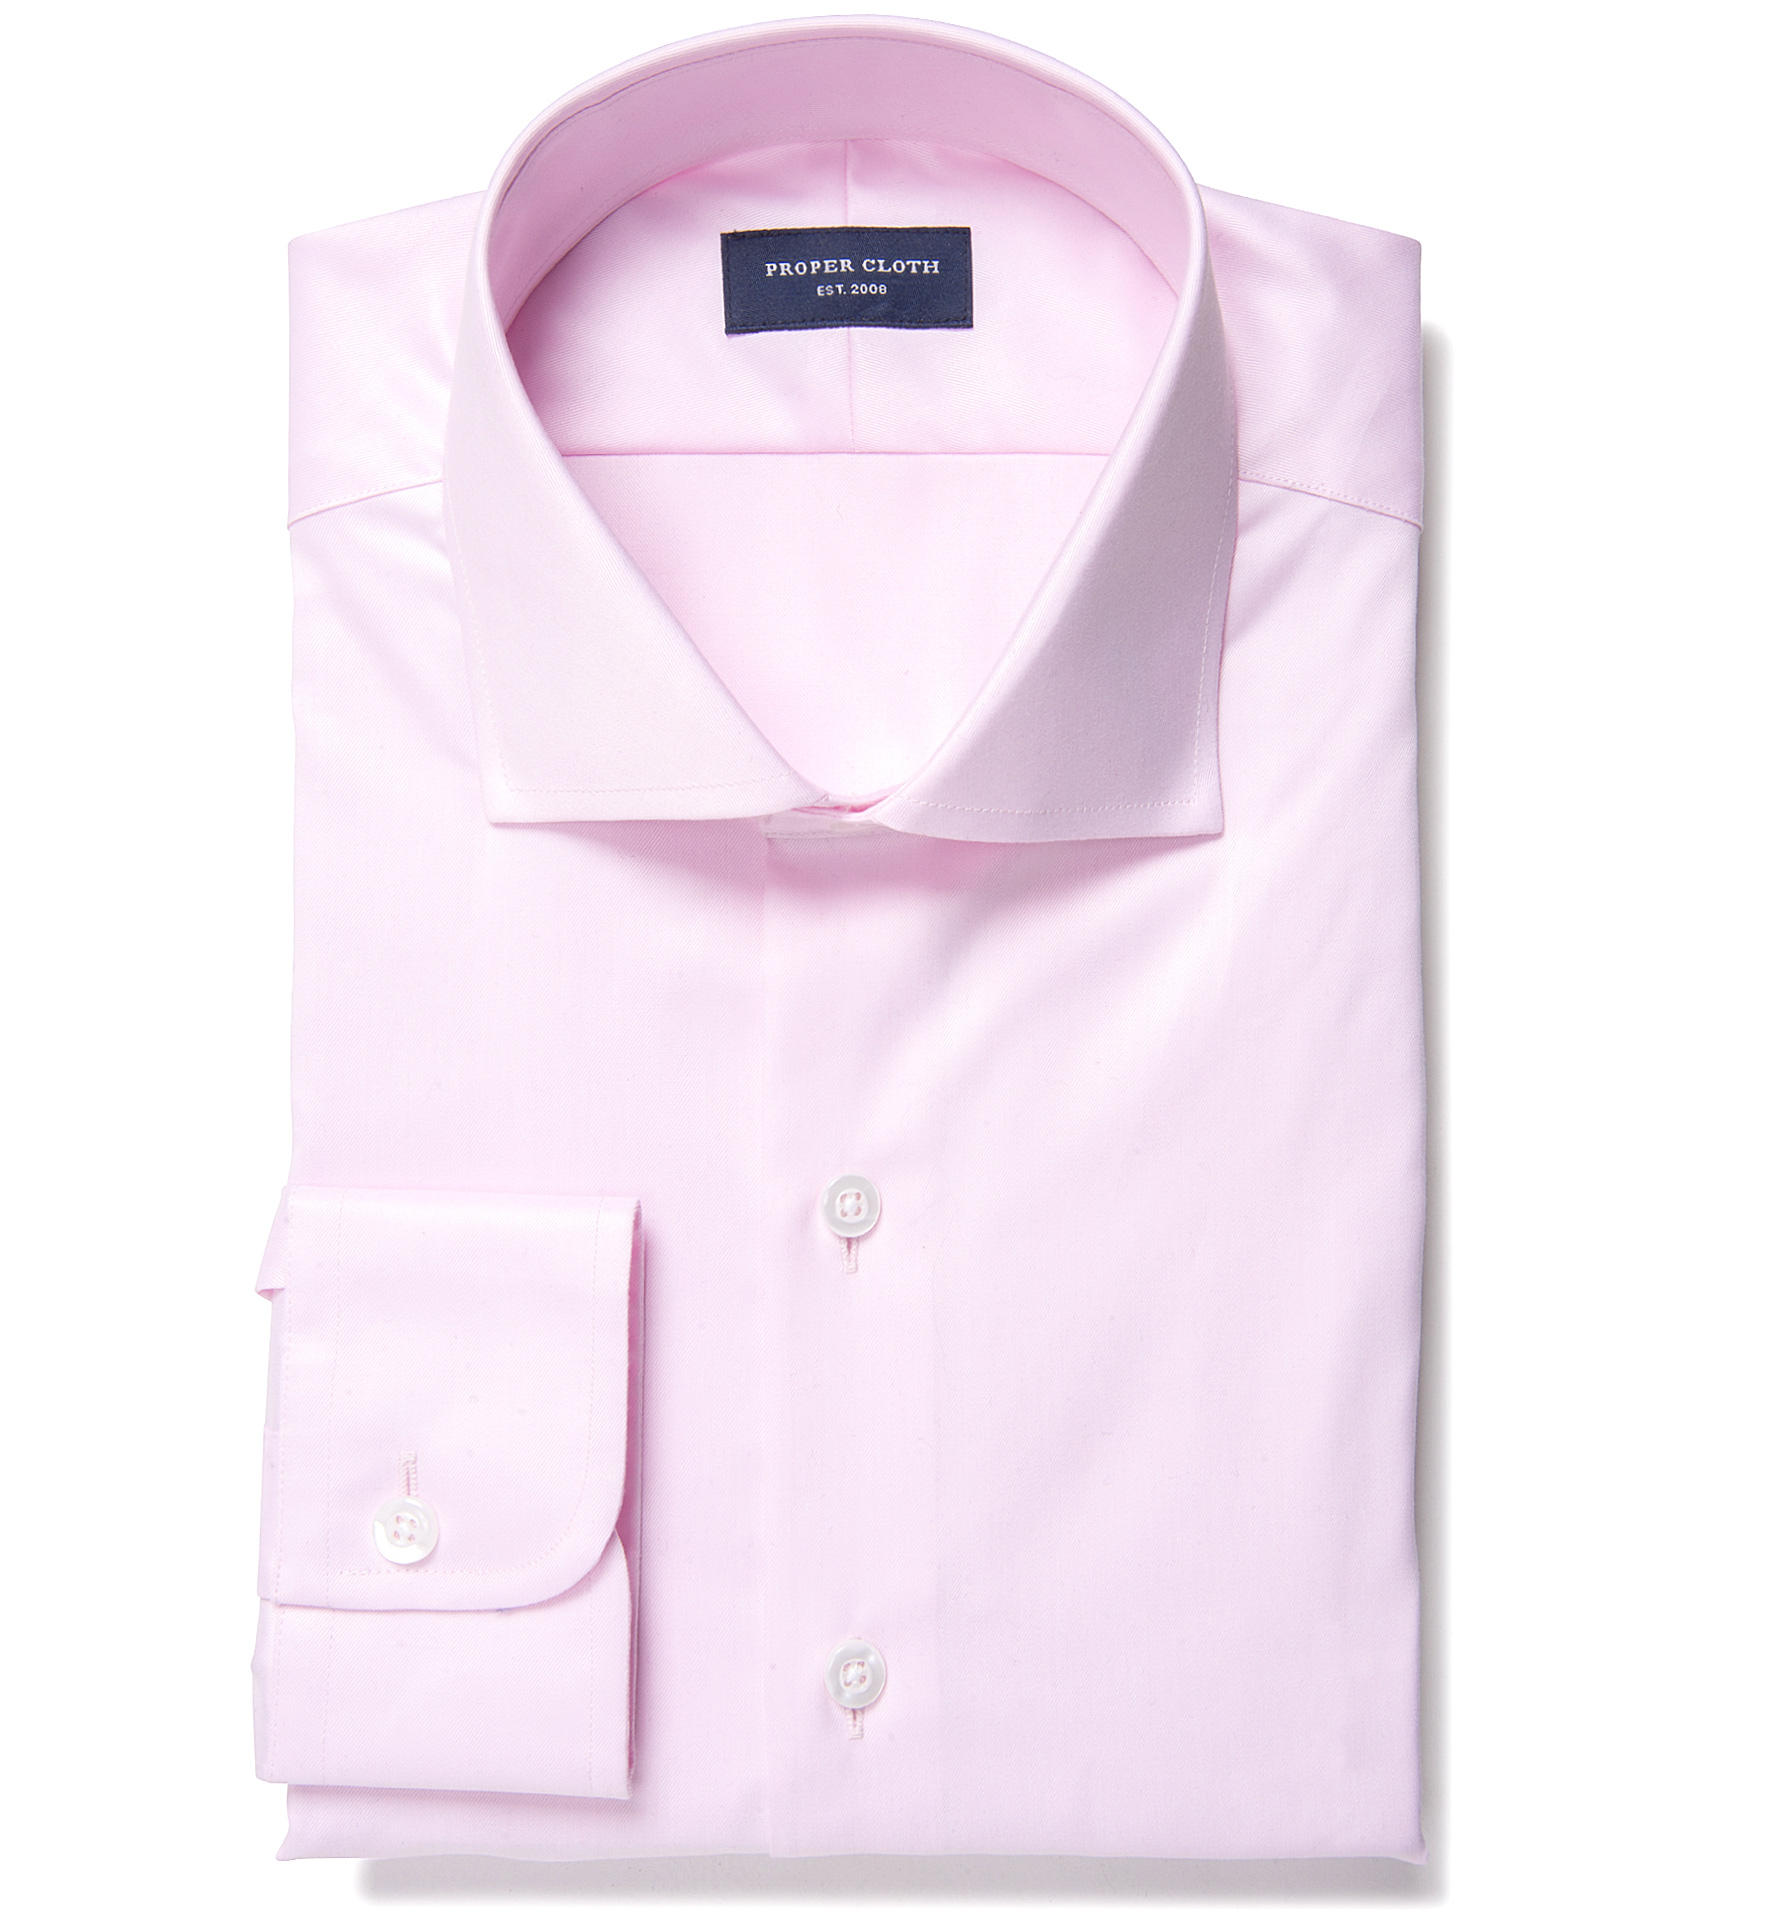 Hudson Pink Wrinkle-Resistant Twill Custom Made Shirt by Proper Cloth